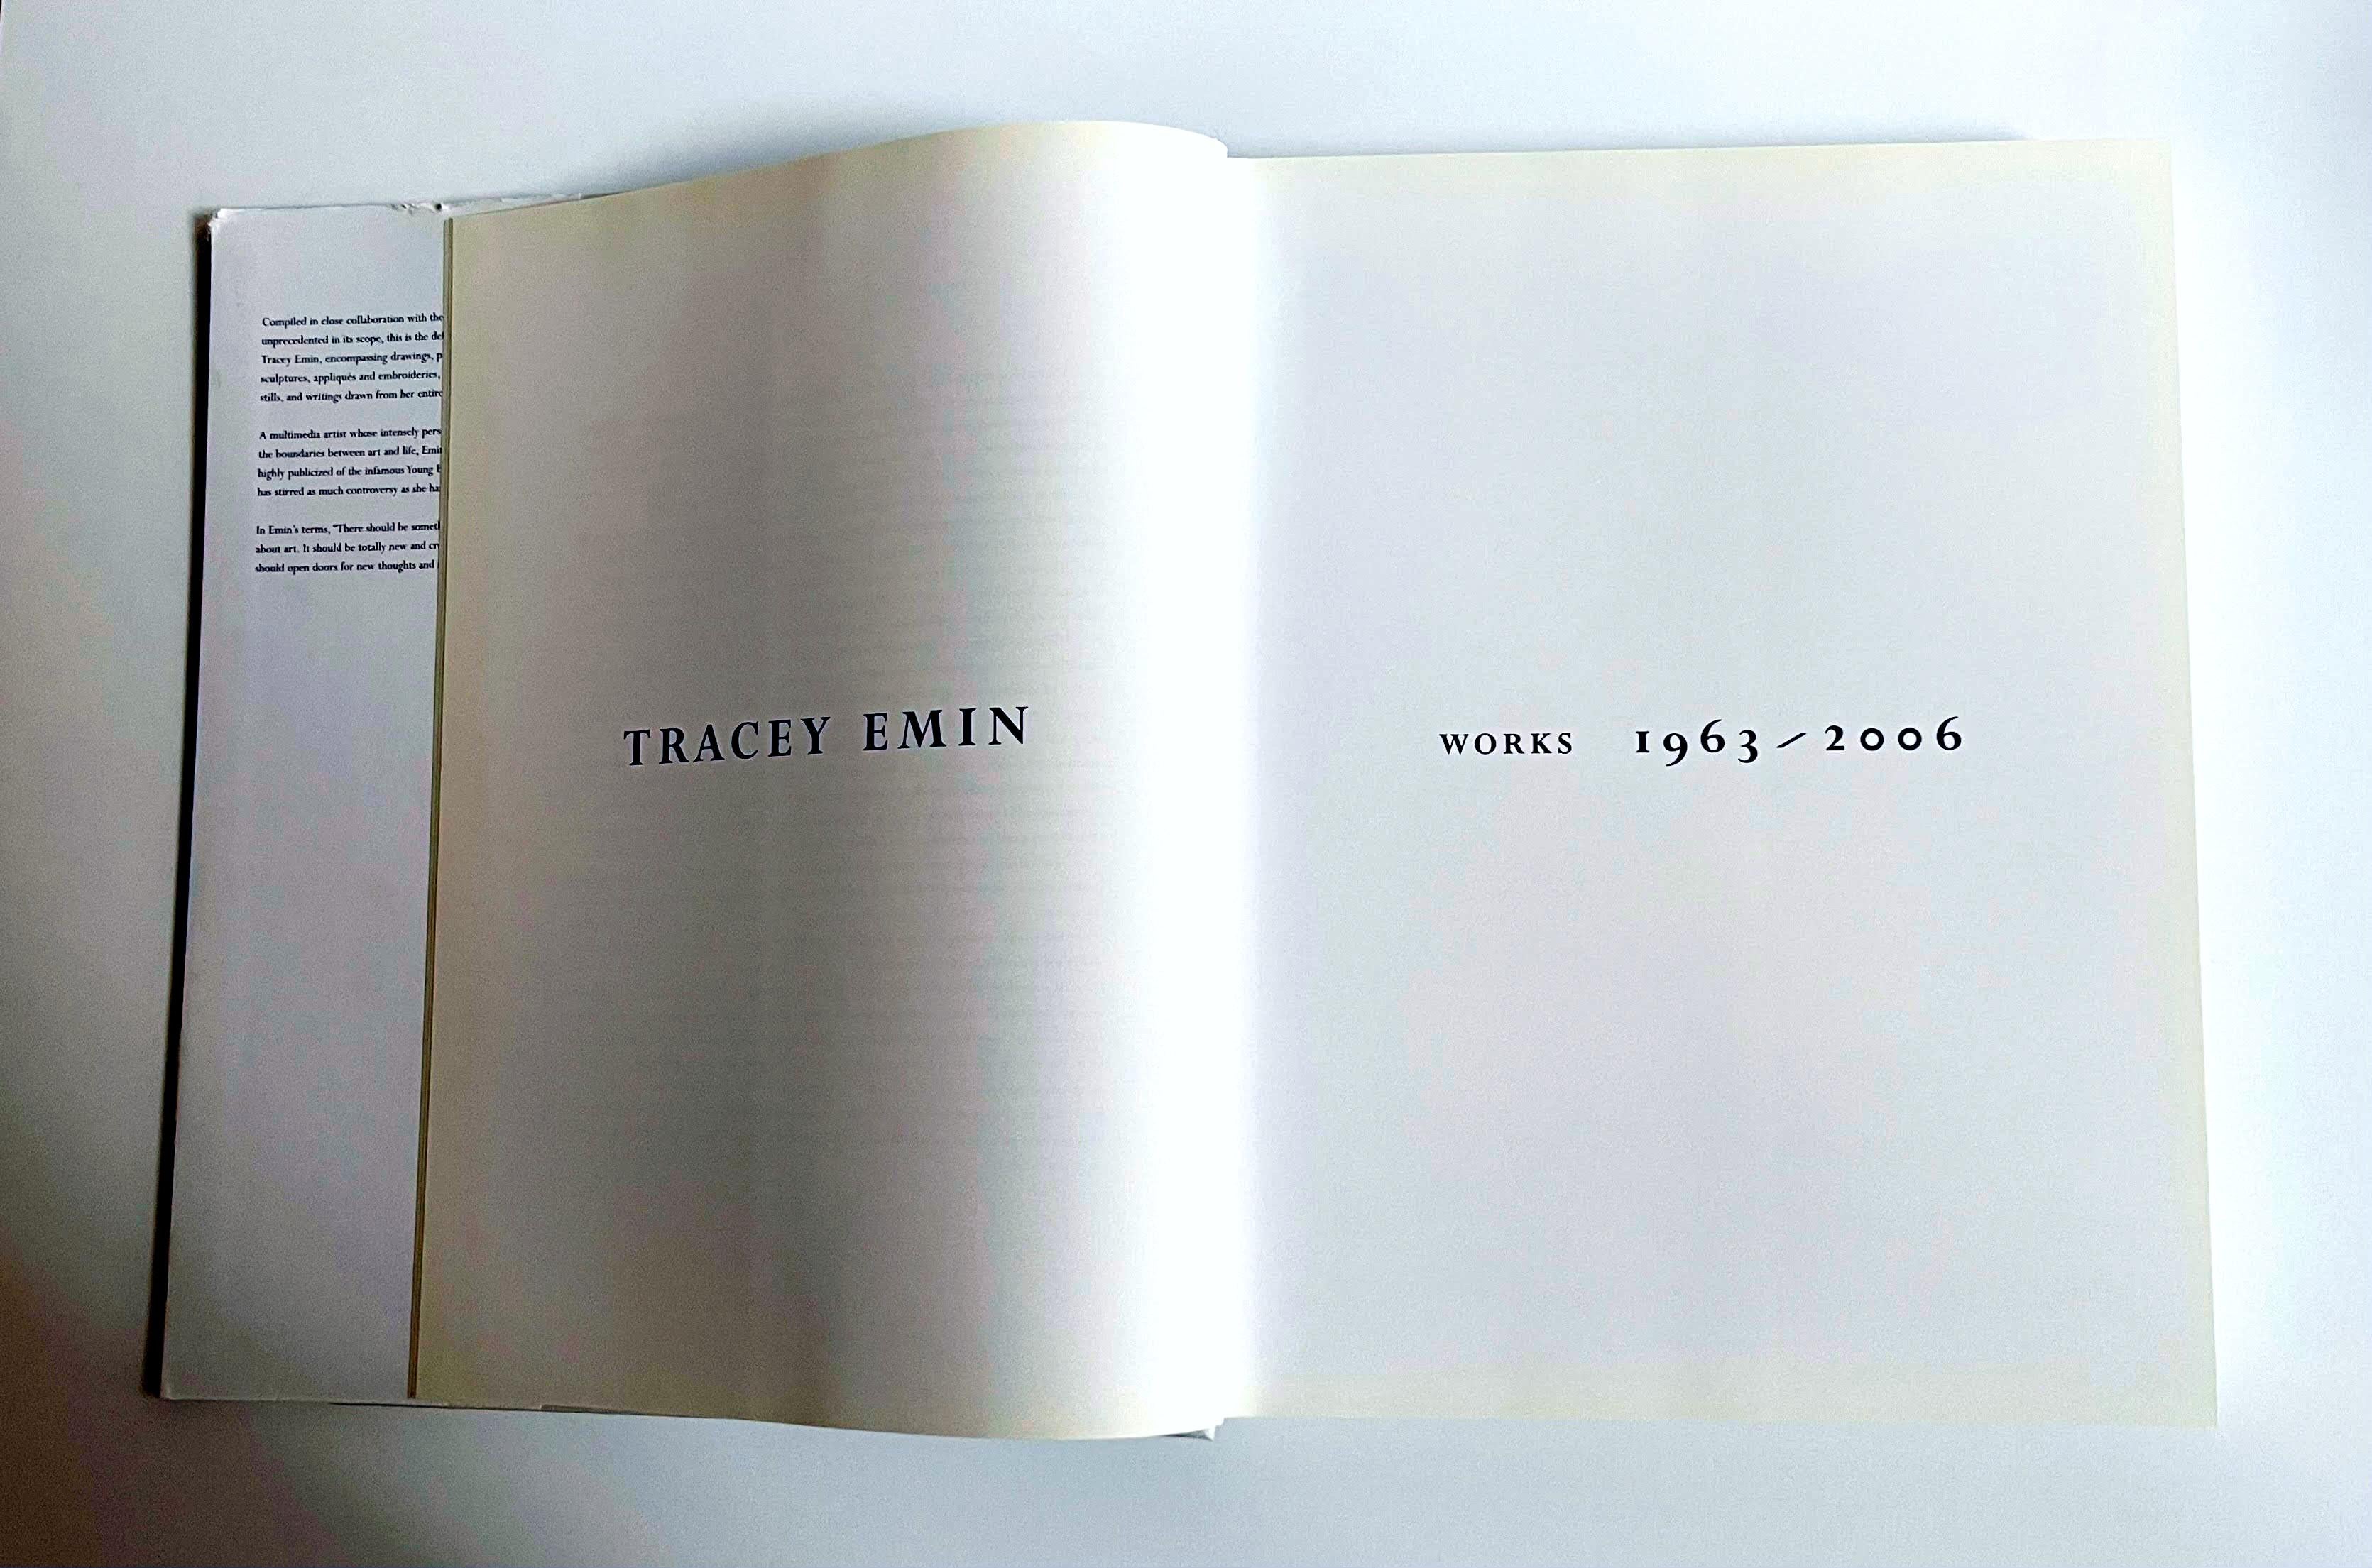 Tracey Emin: Works 1963-2006 (hand signed and dated by Tracey Emin) 6